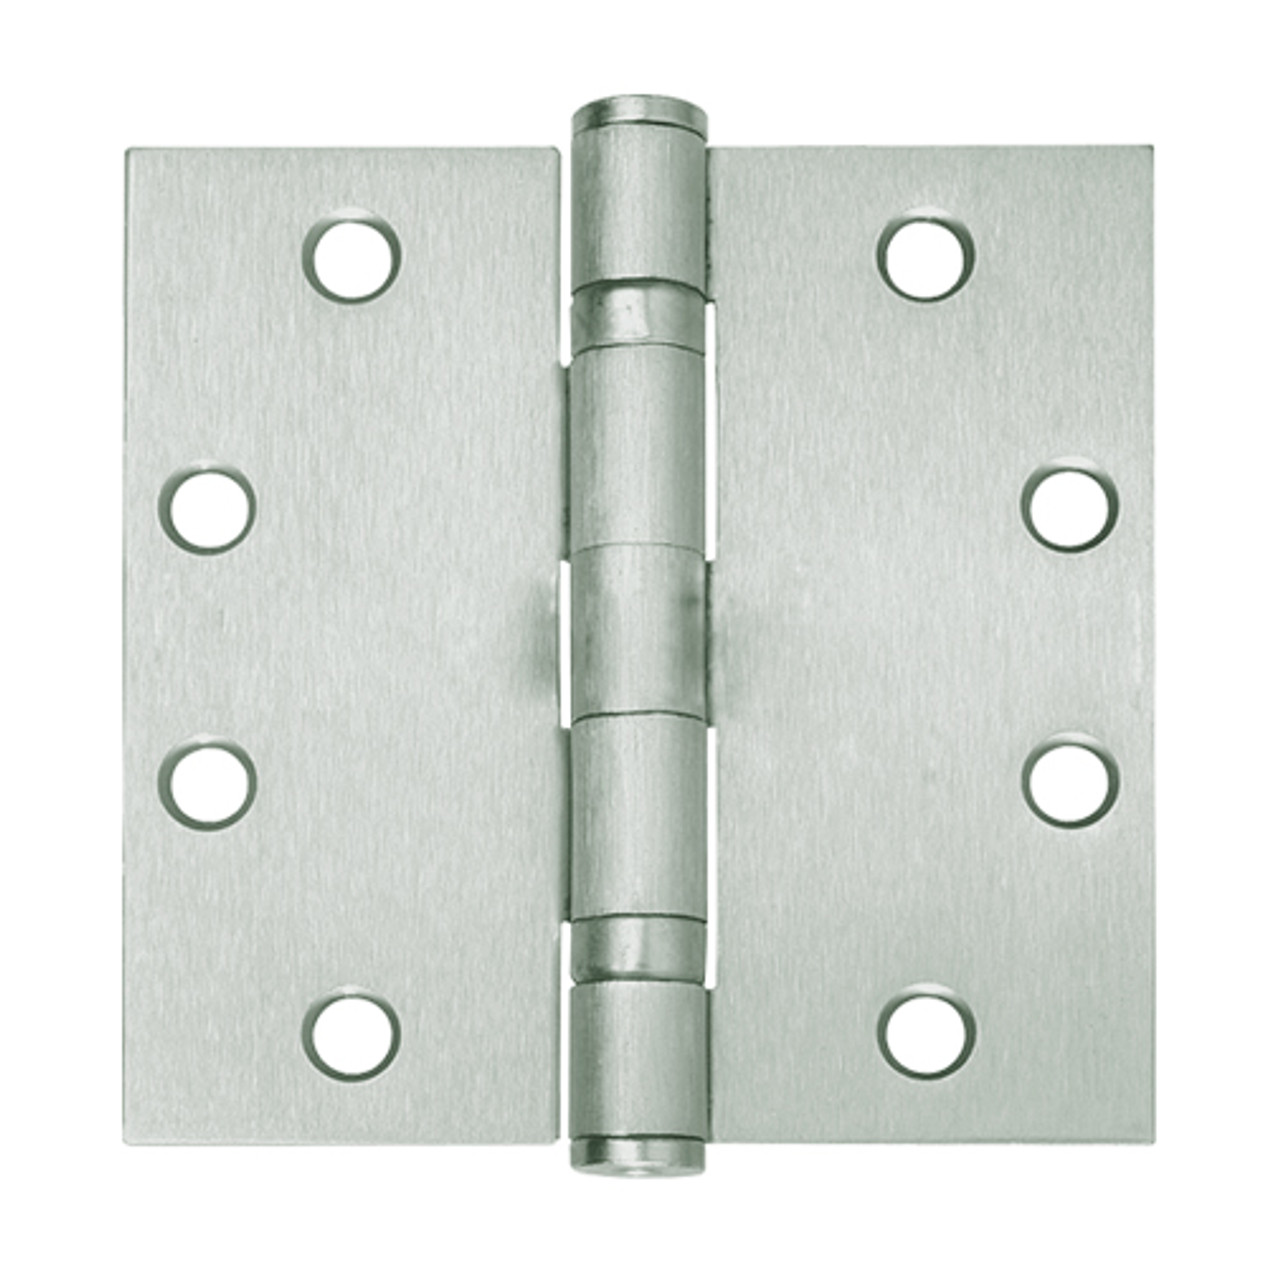 5BB1-4-5x4-5-646-TW8 IVES 5 Knuckle Ball Bearing Full Mortise Hinge with Electric Thru-Wire in Satin Nickel Plated